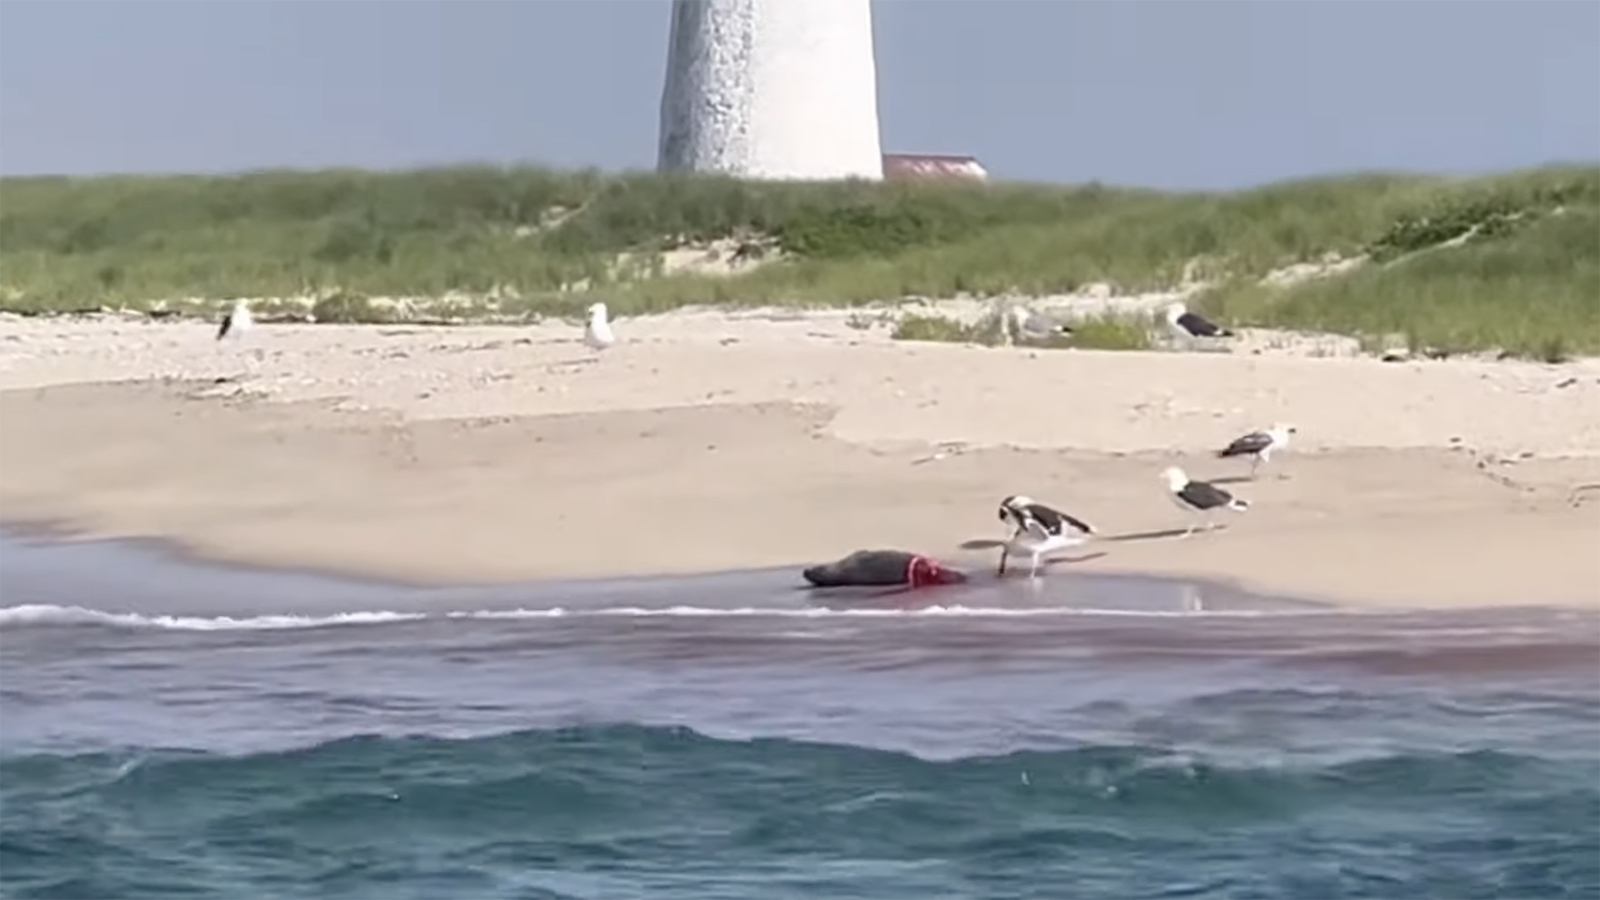 A shark attacked a seal near the beach in Nantucket, which washed ashore while injured.